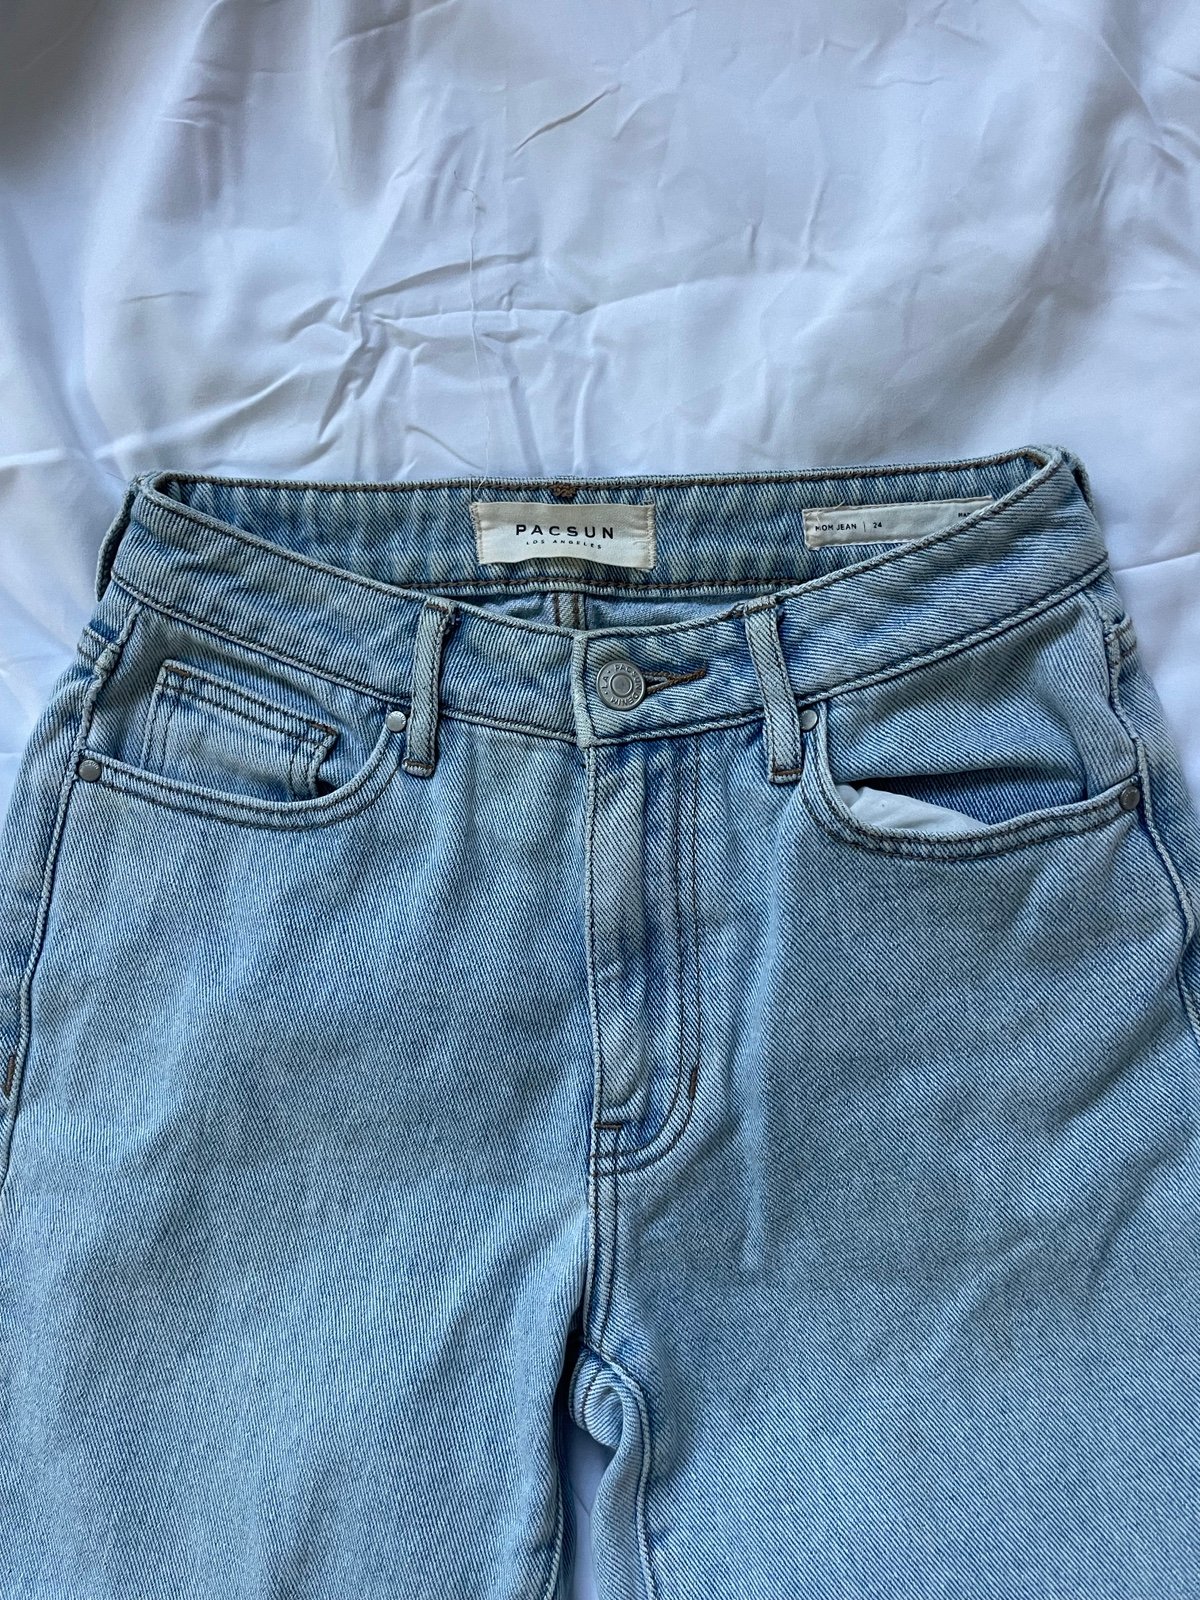 Great pacsun mom jeans J7p121rKv New Style